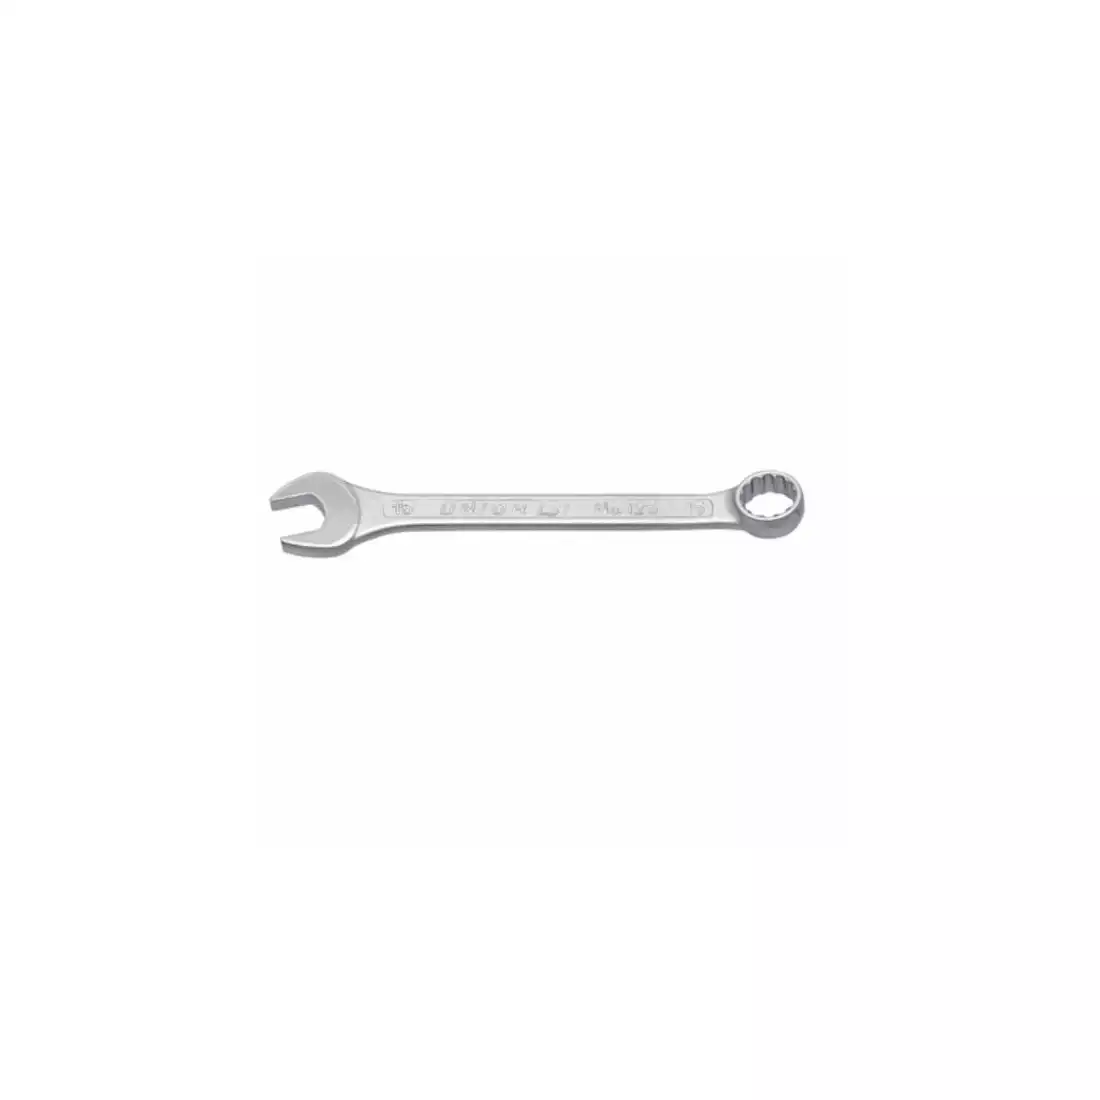 UNIOR combination wrench, short type 14 mm